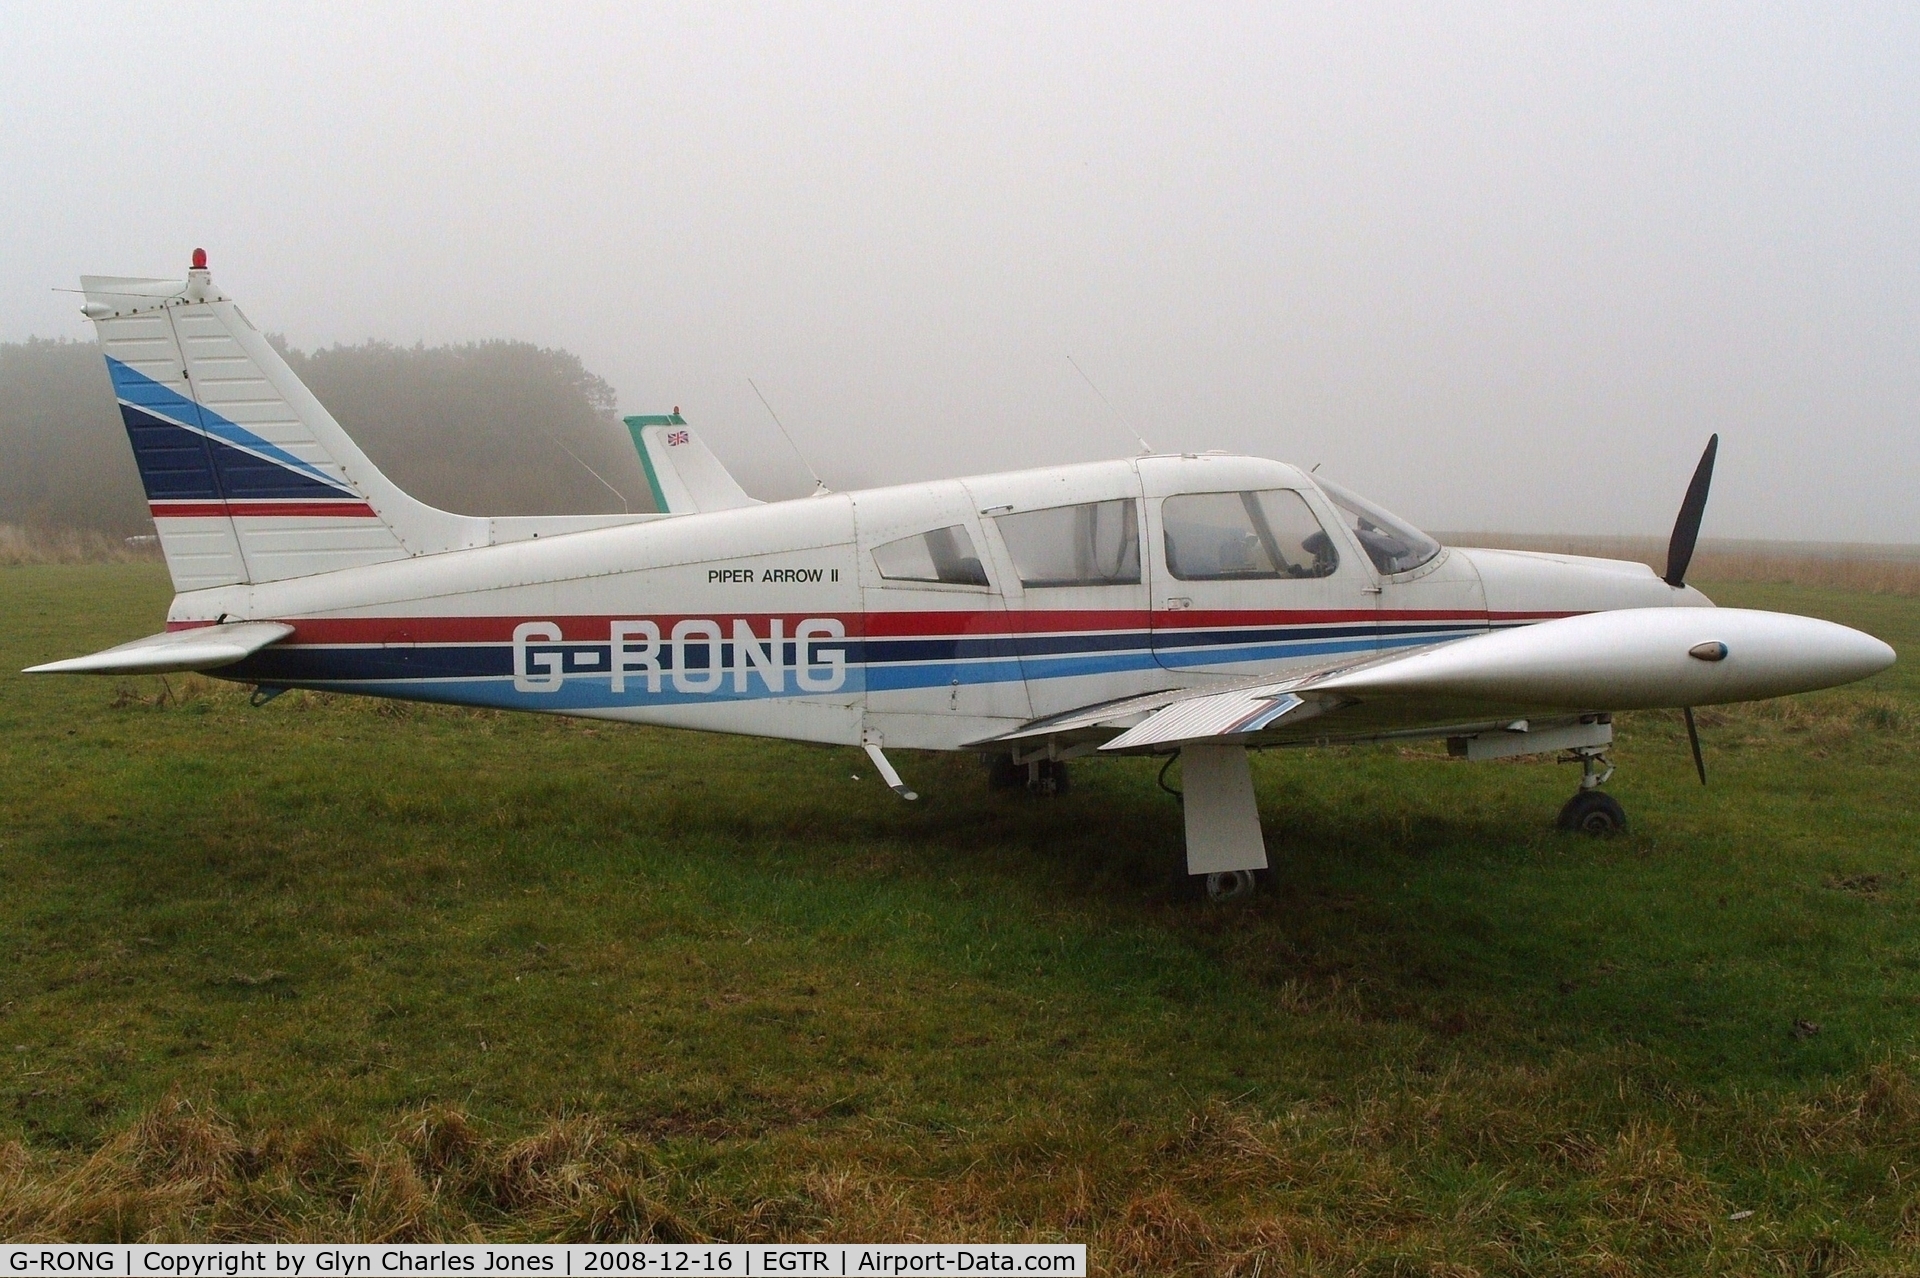 G-RONG, 1973 Piper PA-28R-200 Cherokee Arrow II C/N 28R-7335148, Taken on a quiet cold and foggy day. With thanks to Elstree control tower who granted me authority to take photographs on the aerodrome. Previously N16451.